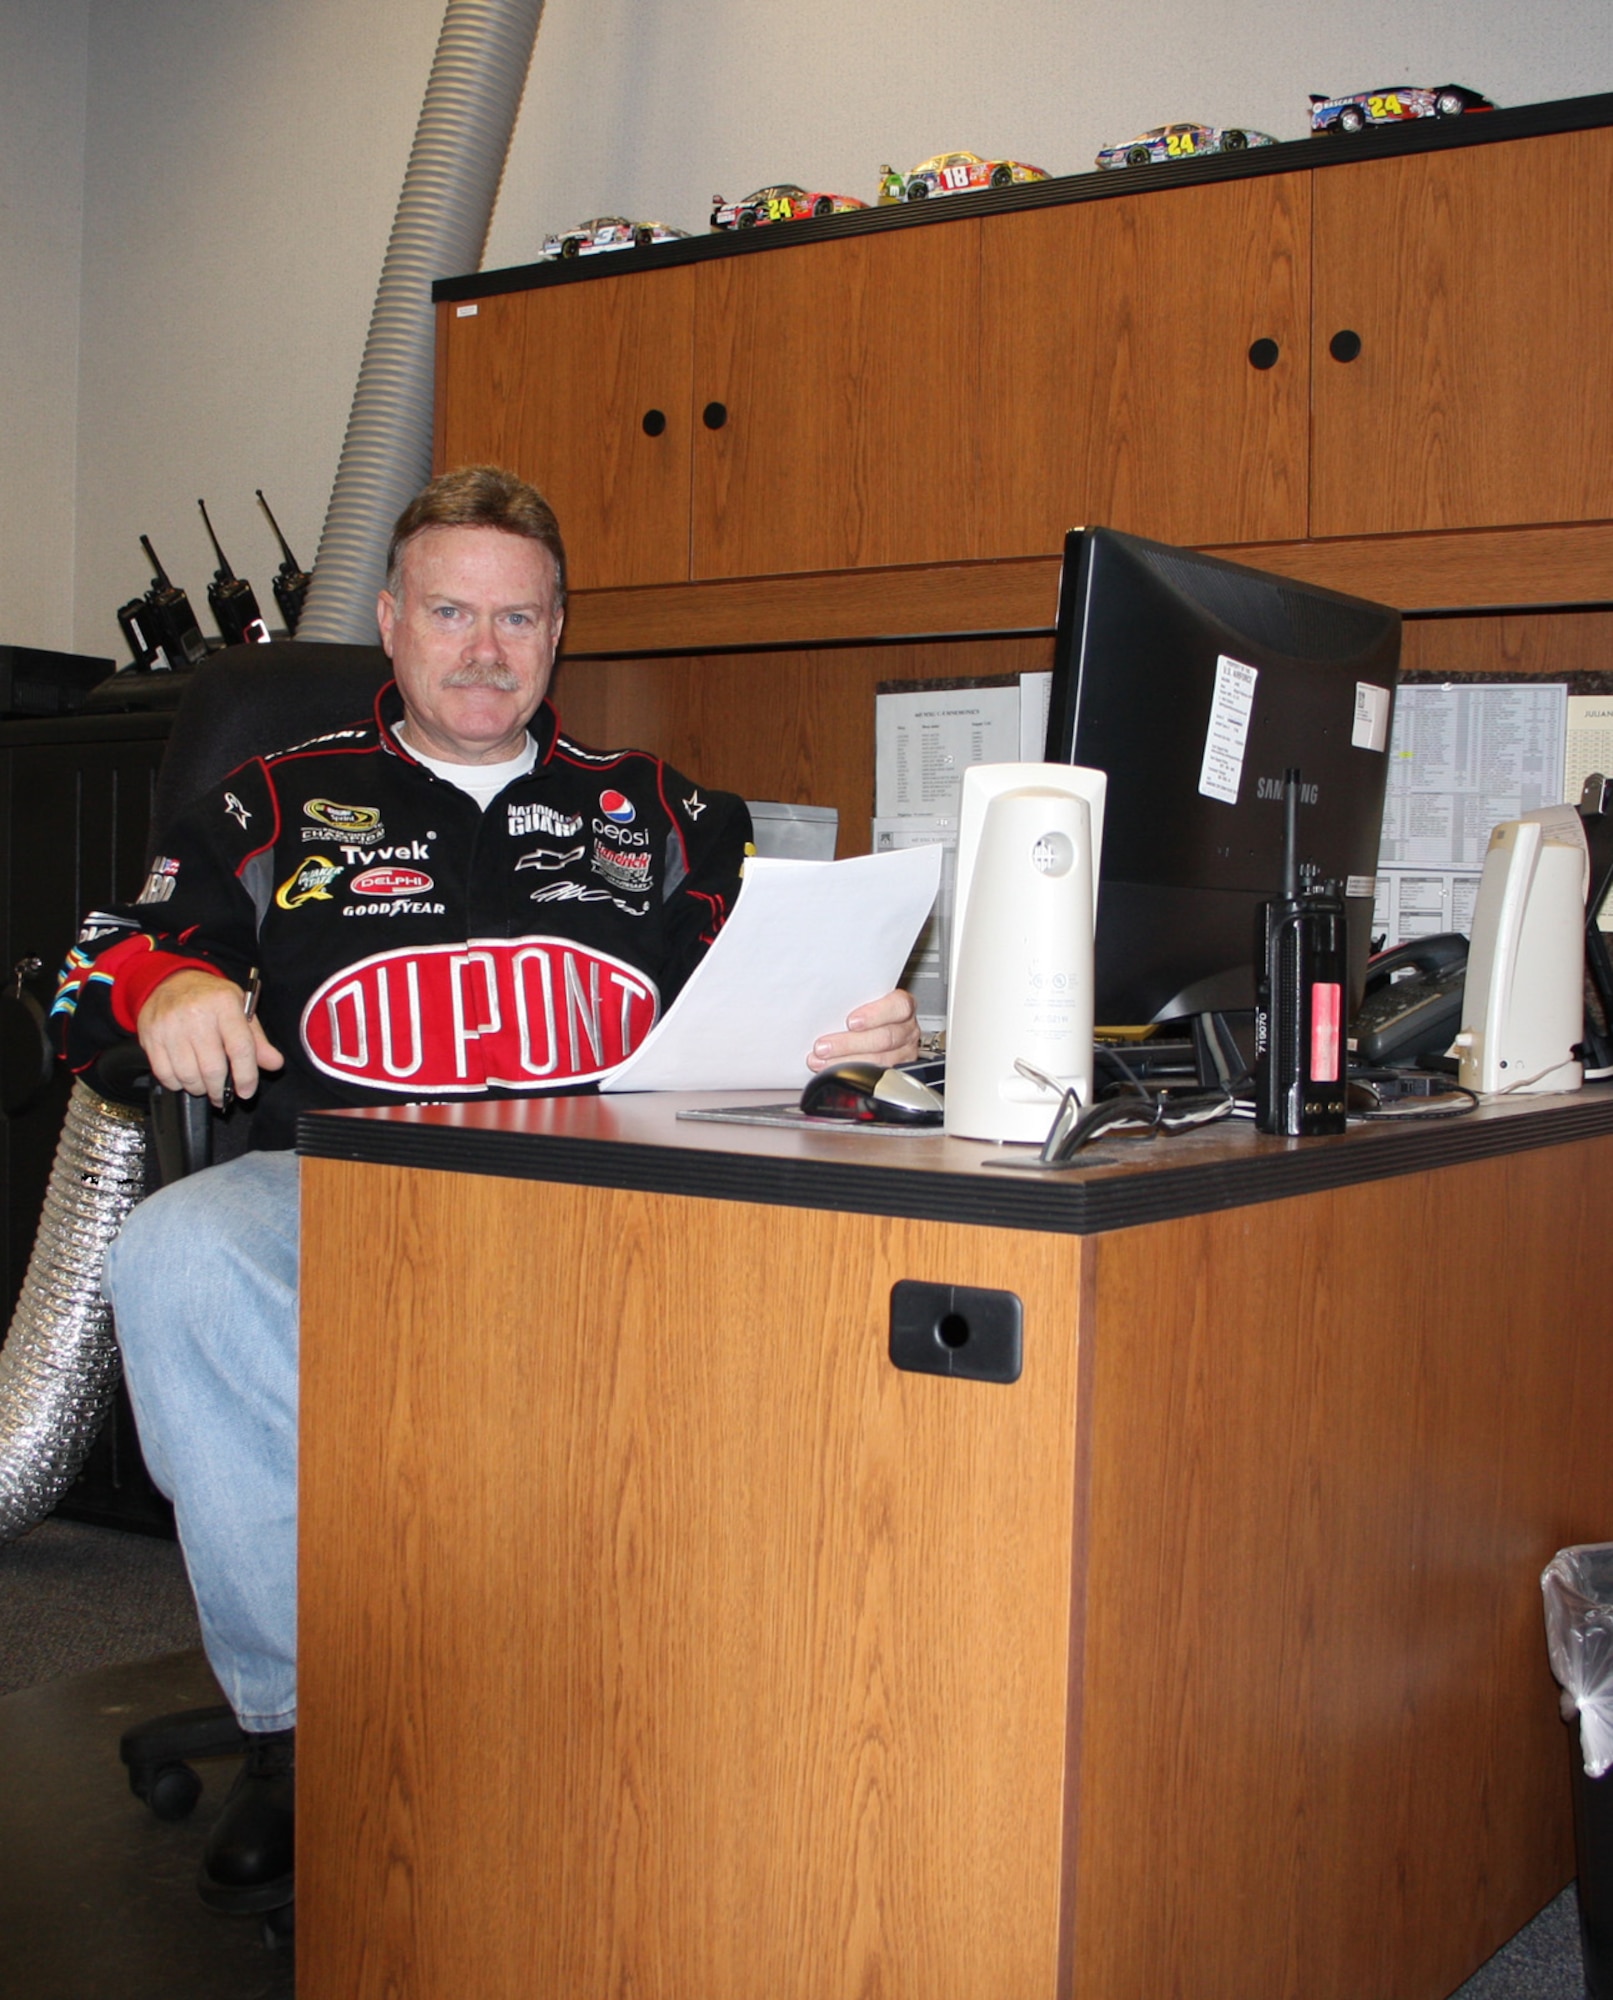 WRIGHT-PATTERSON AIR FORCE BASE, Ohio - Master Sgt. Steve Dunn, 445th Maintenance Operations Flight, shows off his NASCAR jacket at work.  Sergeant Dunn became addicted to NASCAR after watching his first race earlier this year. Some of the models he bought are shown here on top of his desk (Air Force photo/Stacy Vaughn).